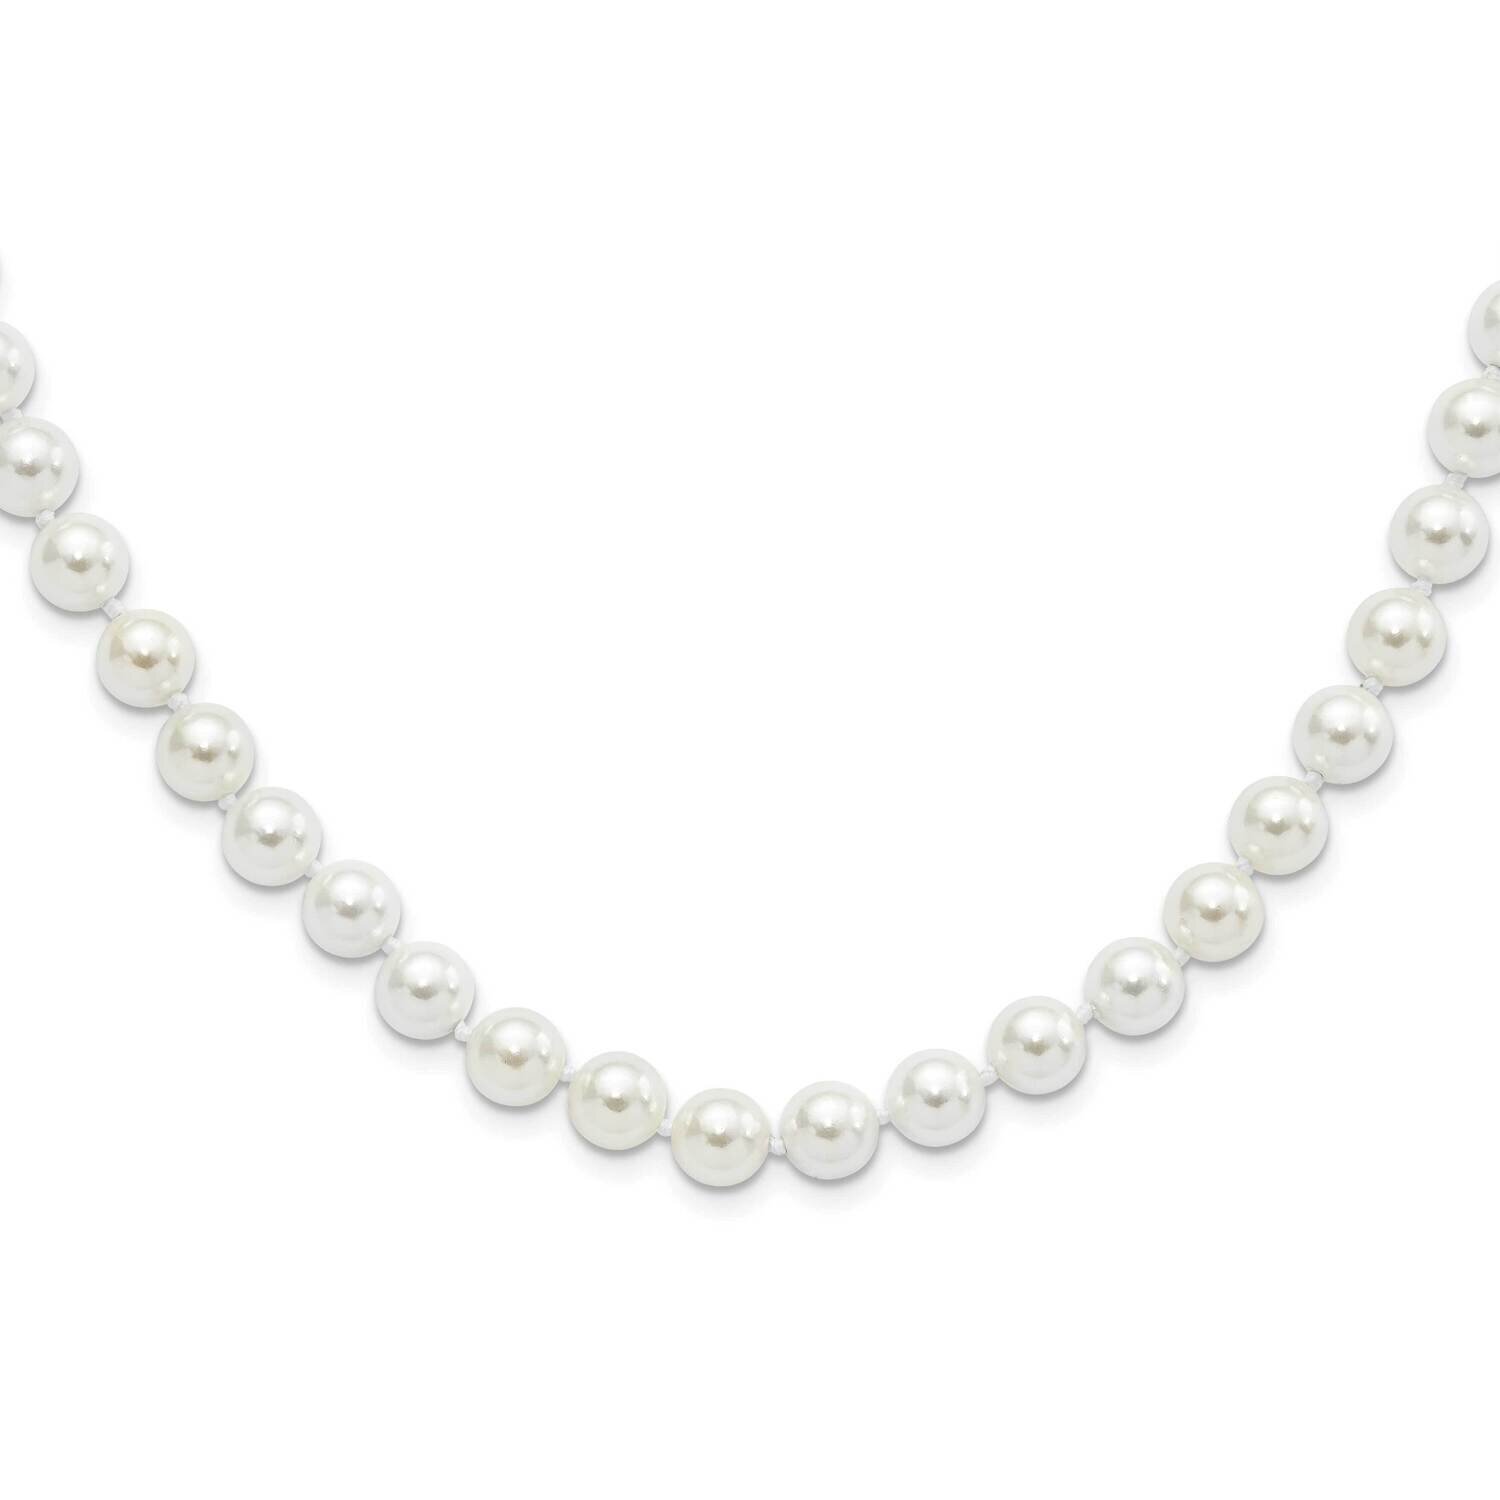 Majestik 8-9mm White Imitation Shell Pearl Necklace Sterling Silver Rhodium-plated QMJNM8W-18